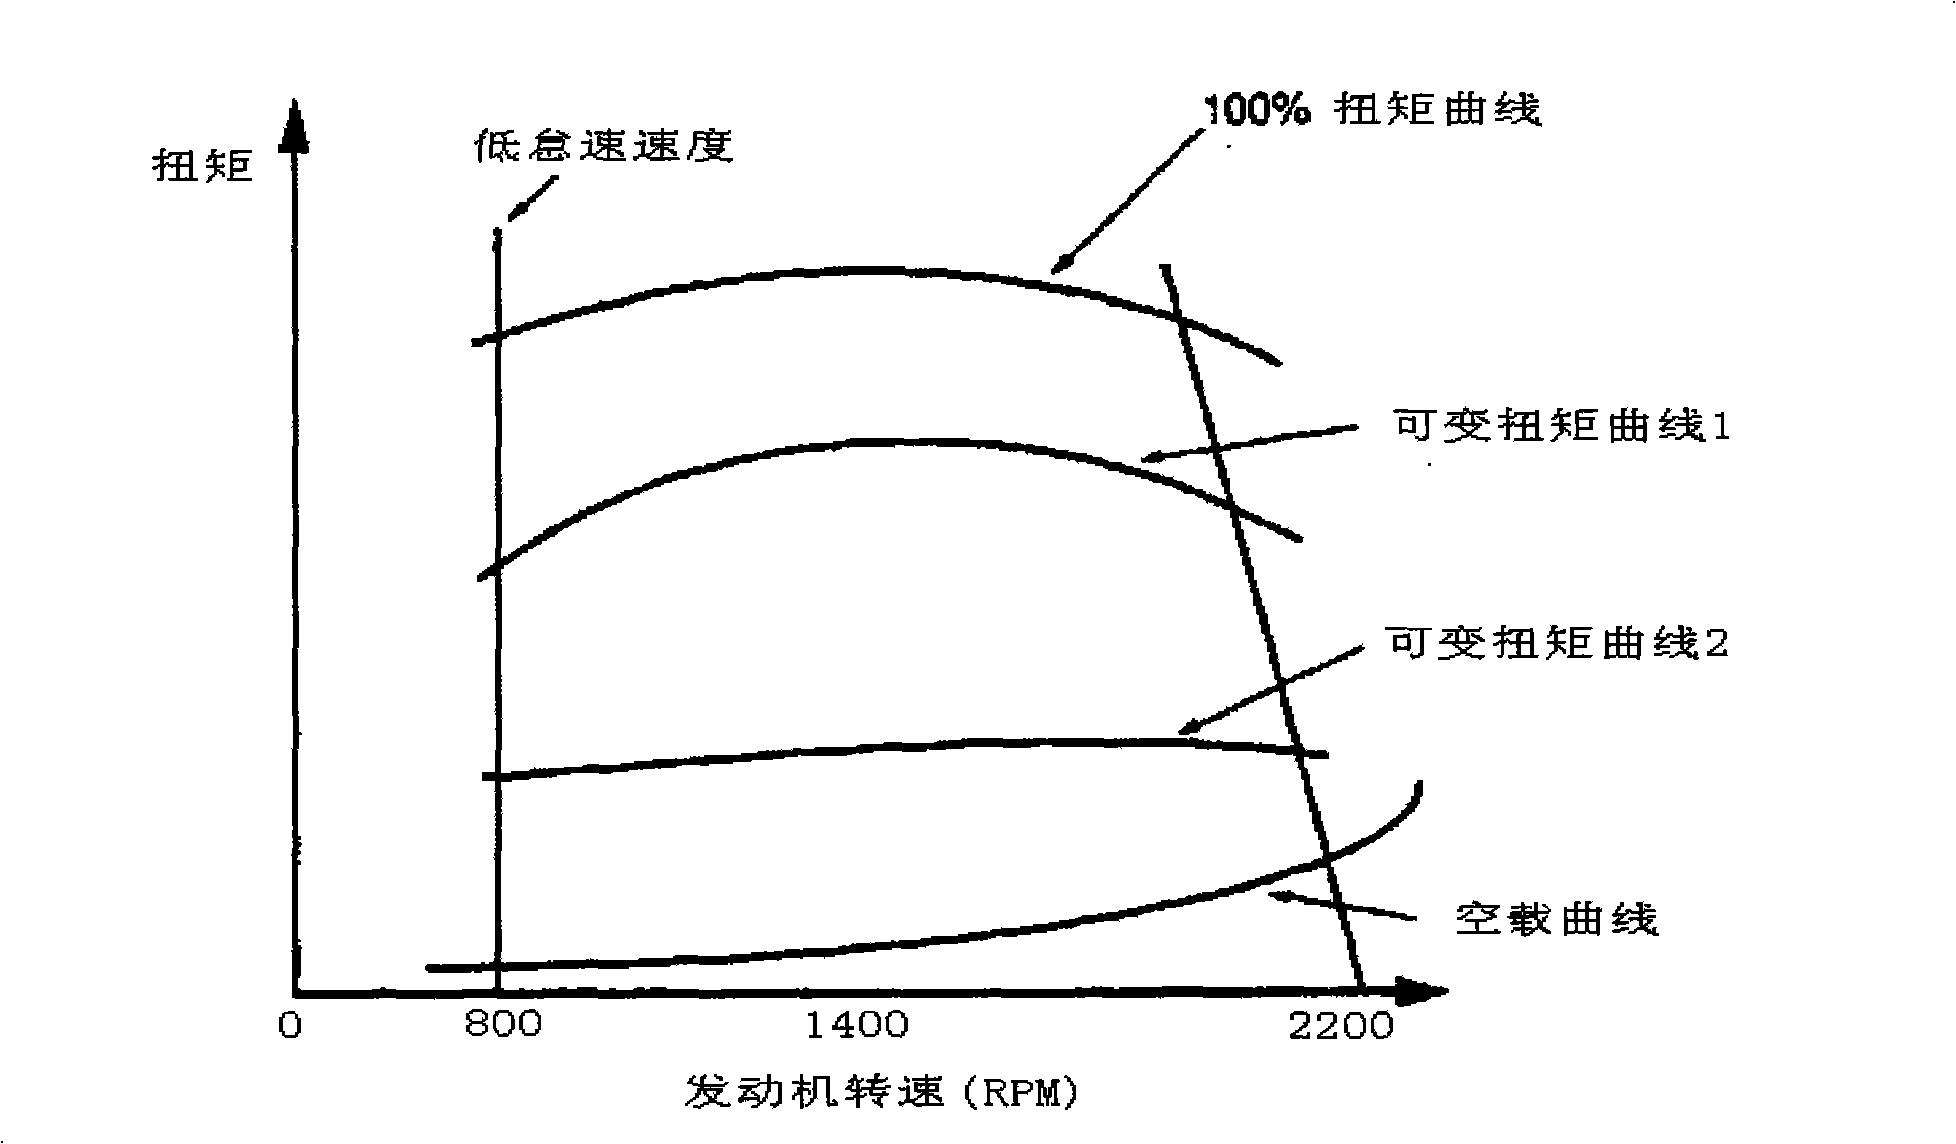 Method for controlling power limit load of caterpillar crane